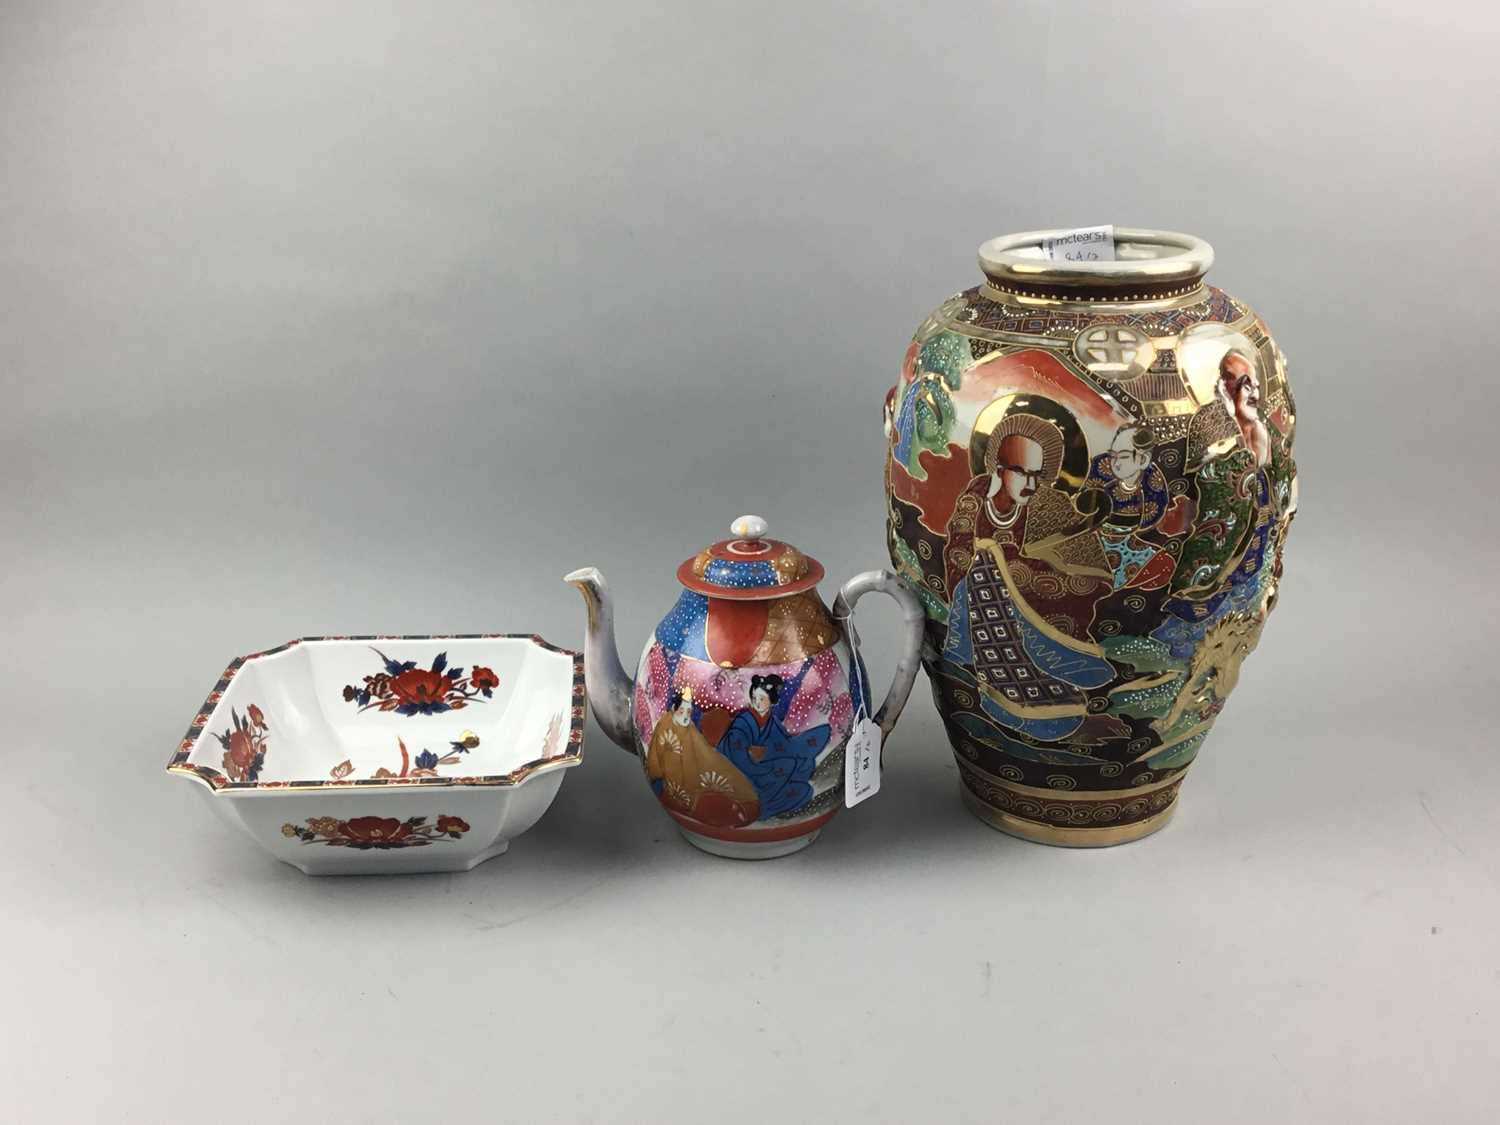 Lot 84 - A JAPANESE VASE AND OTHER JAPANESE CERAMICS